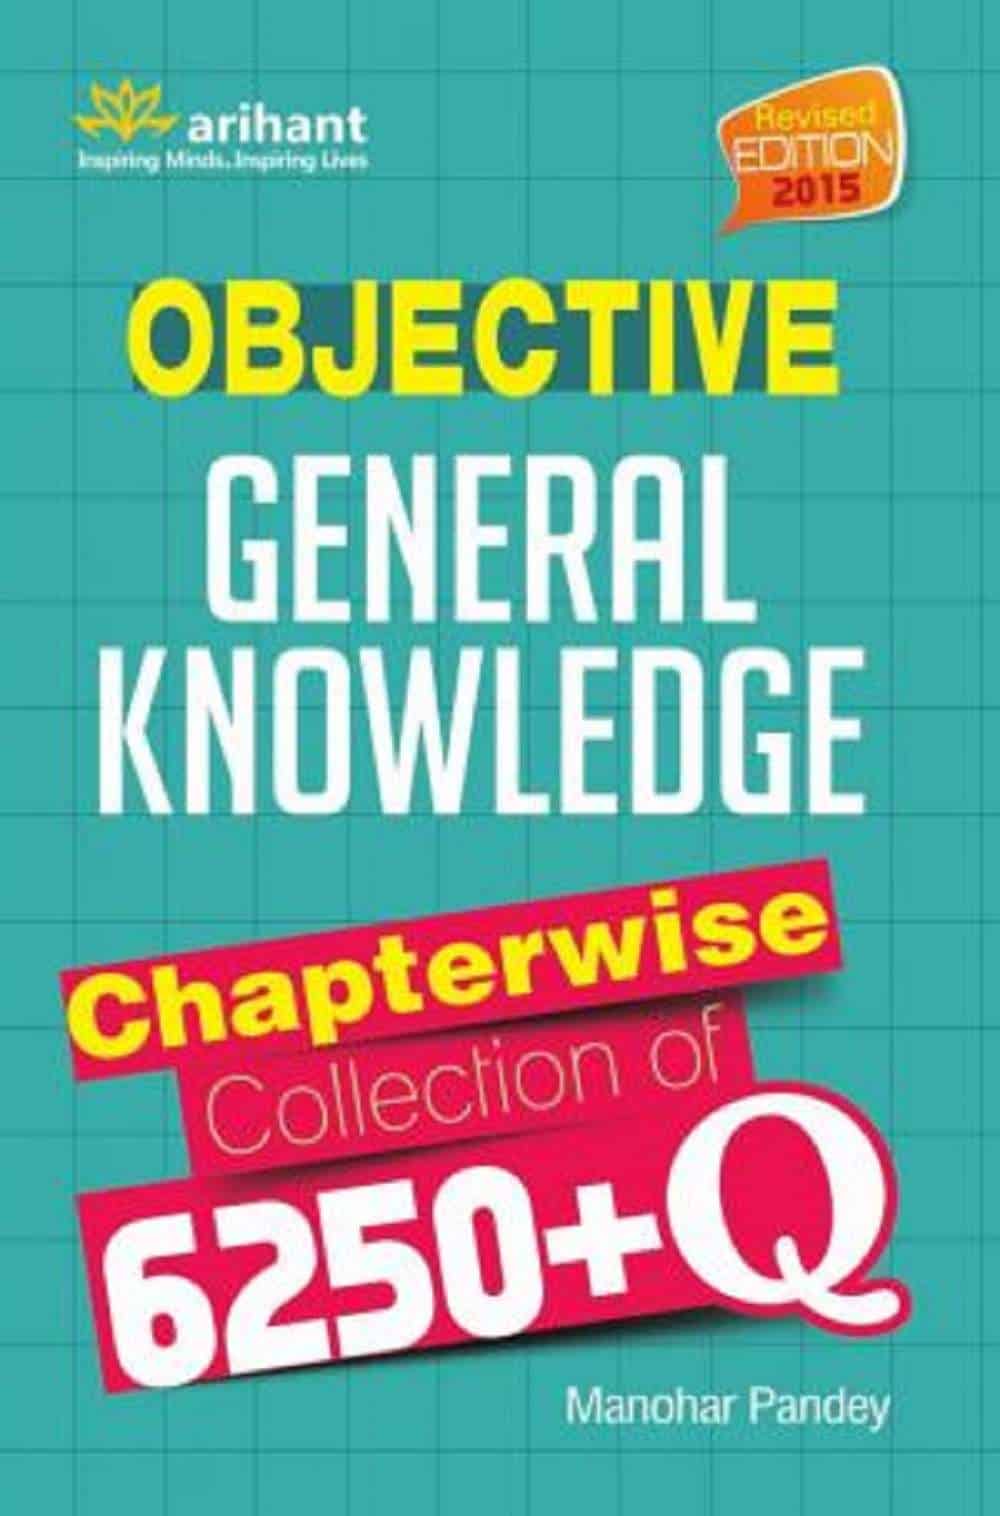 Arihant 6250+ Objective General Knowledge Question Book